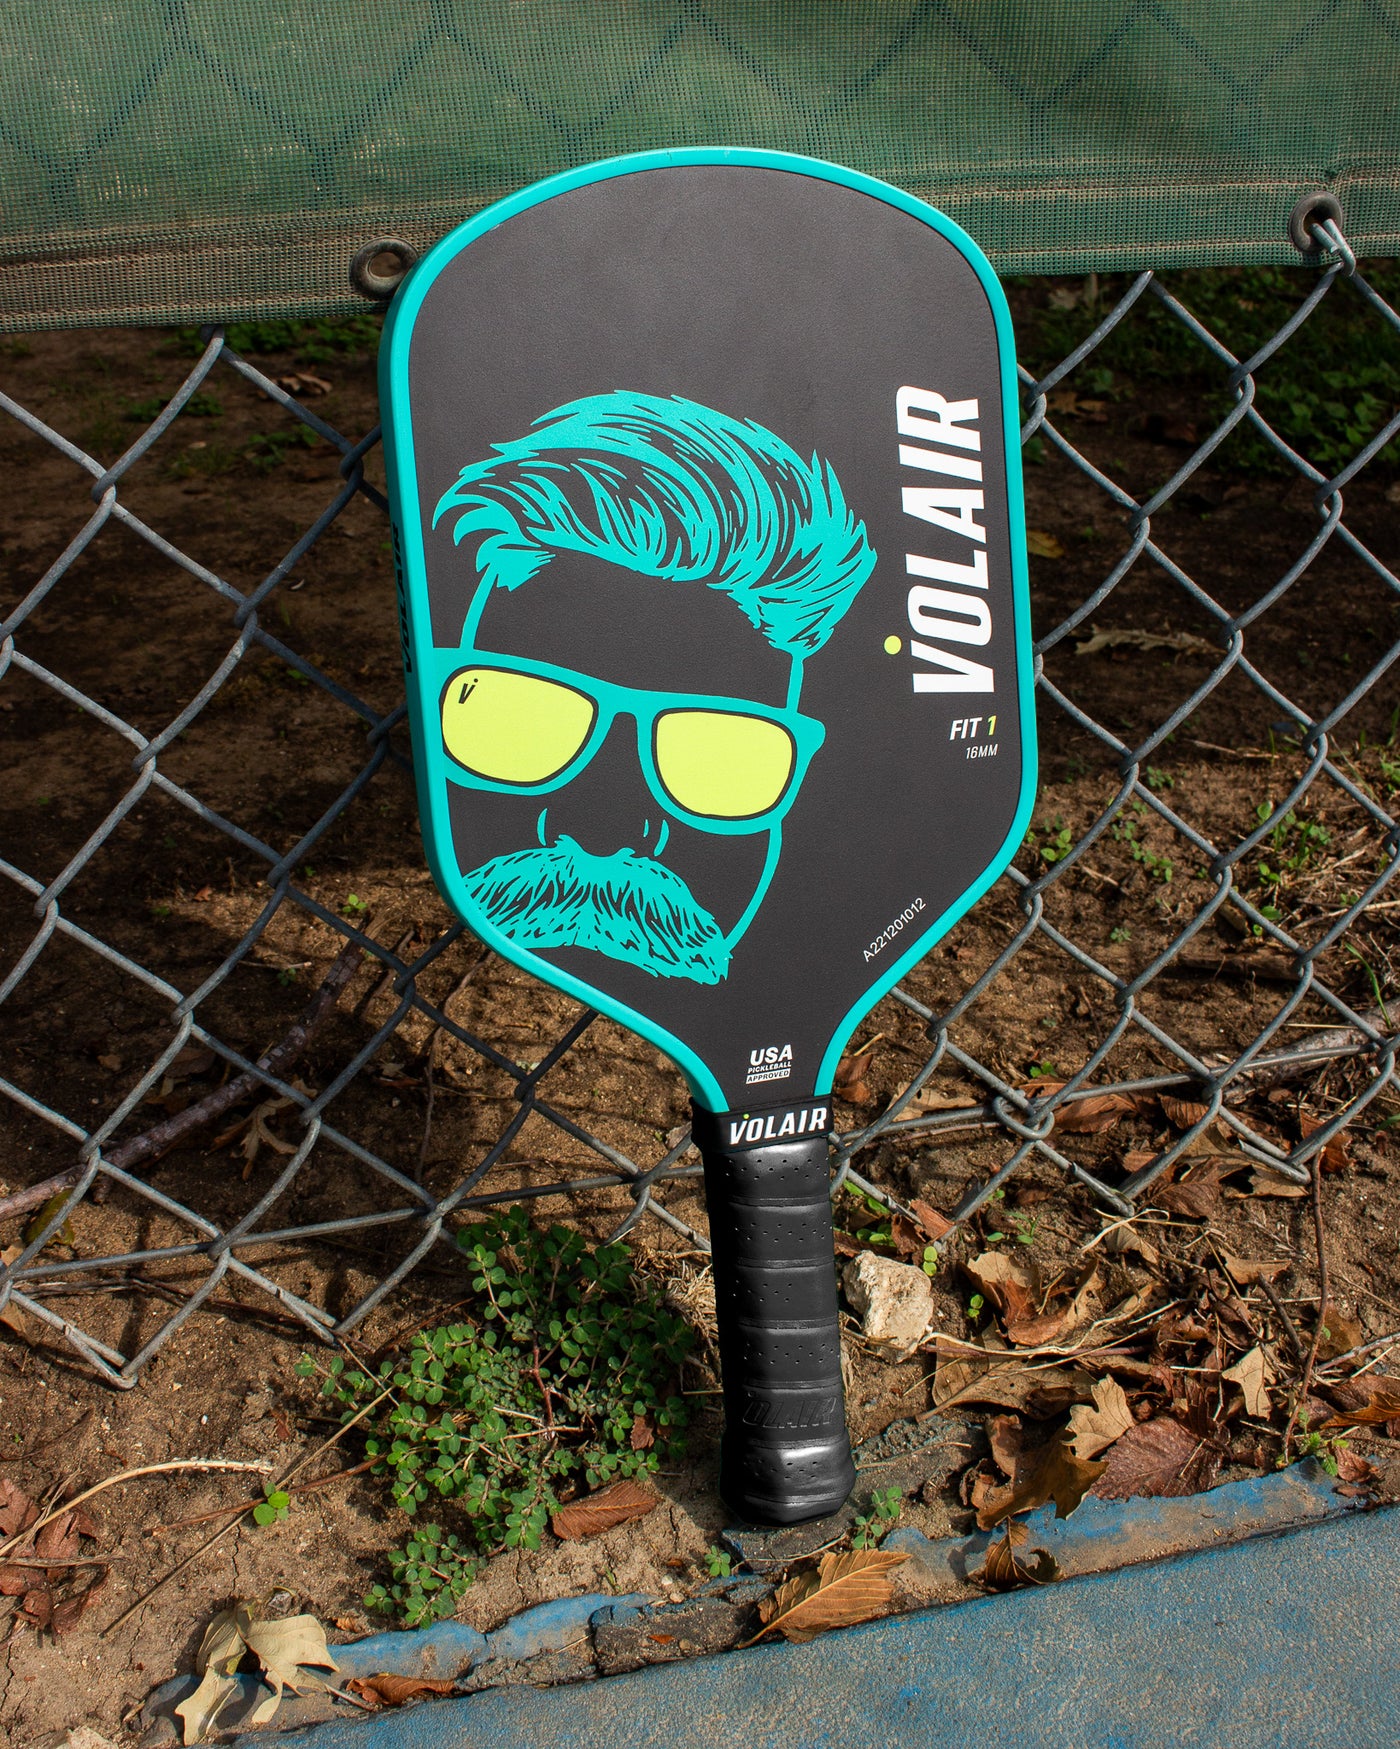 Fit 1 Limited Edition Paddle